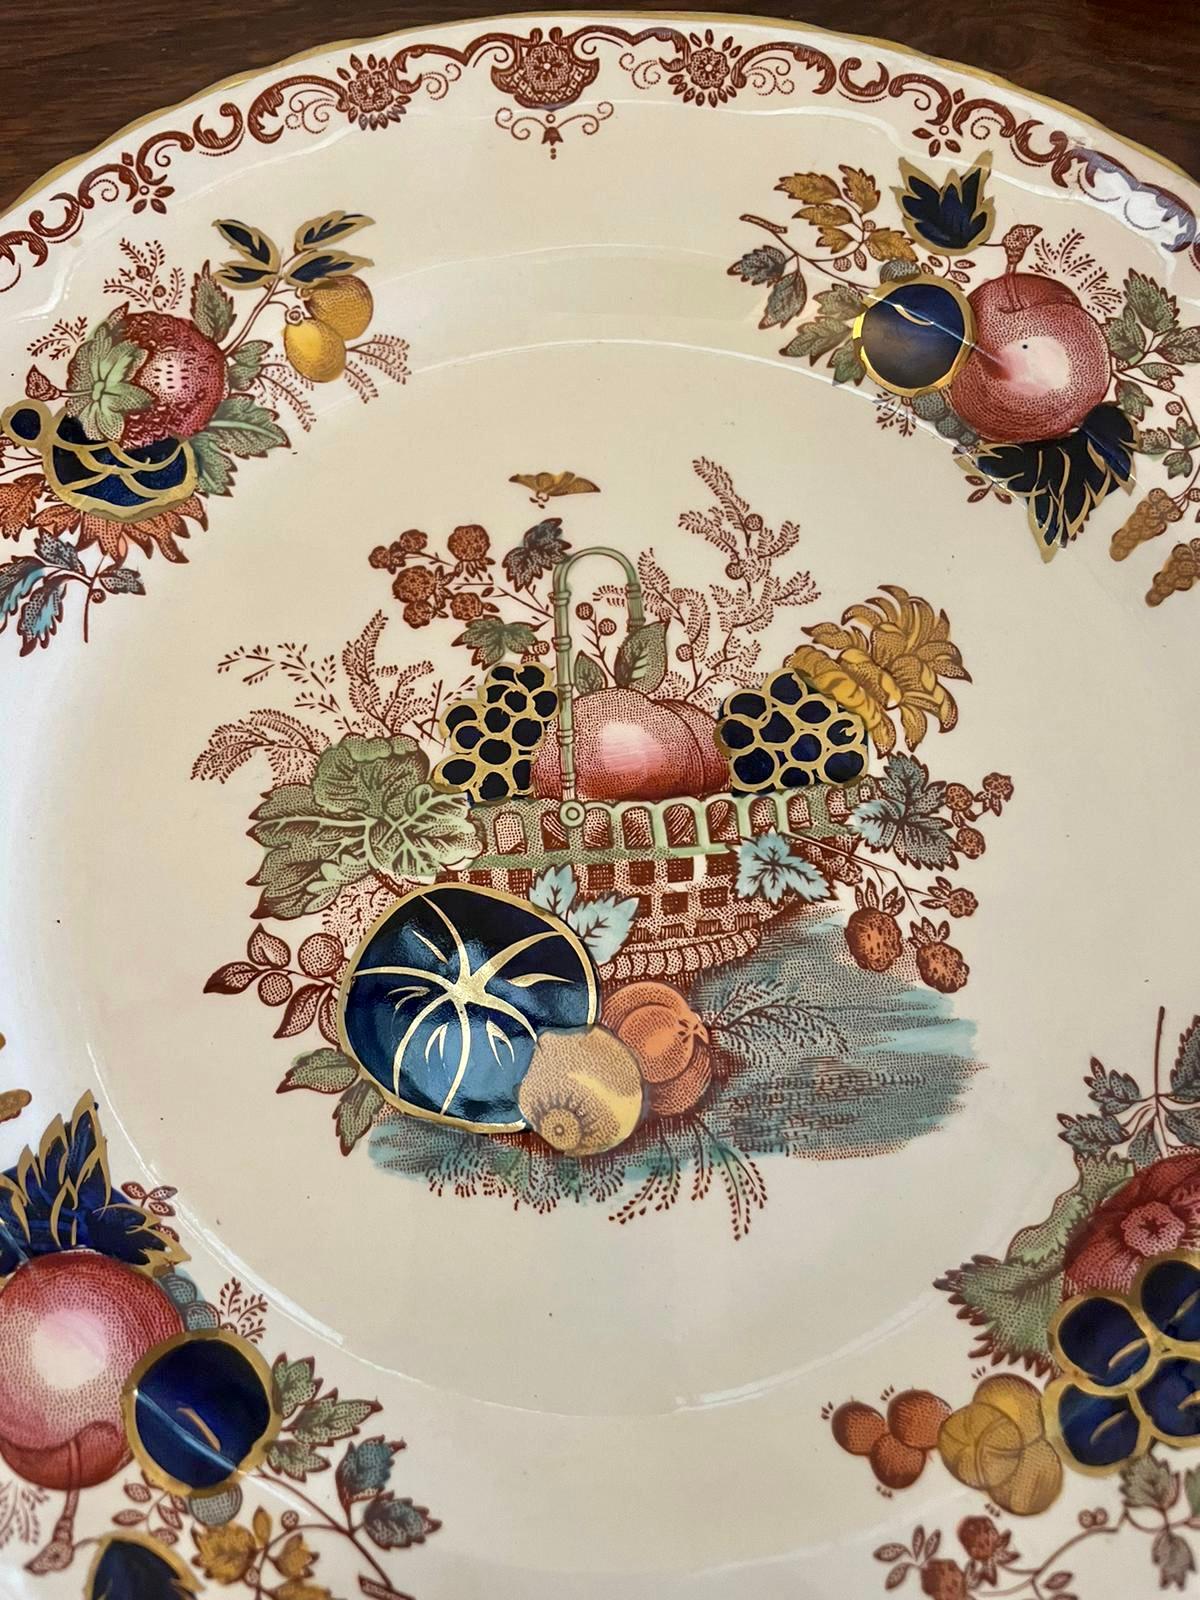 Quality antique hand painted Masons Ironstone plate with fantastic quality hand painted decoration in red, pink, orange, blue, green and gold colours 


A beautifully decorated plate in mint condition


Dimensions:
Height 2.5 x Width 26 x Depth 26